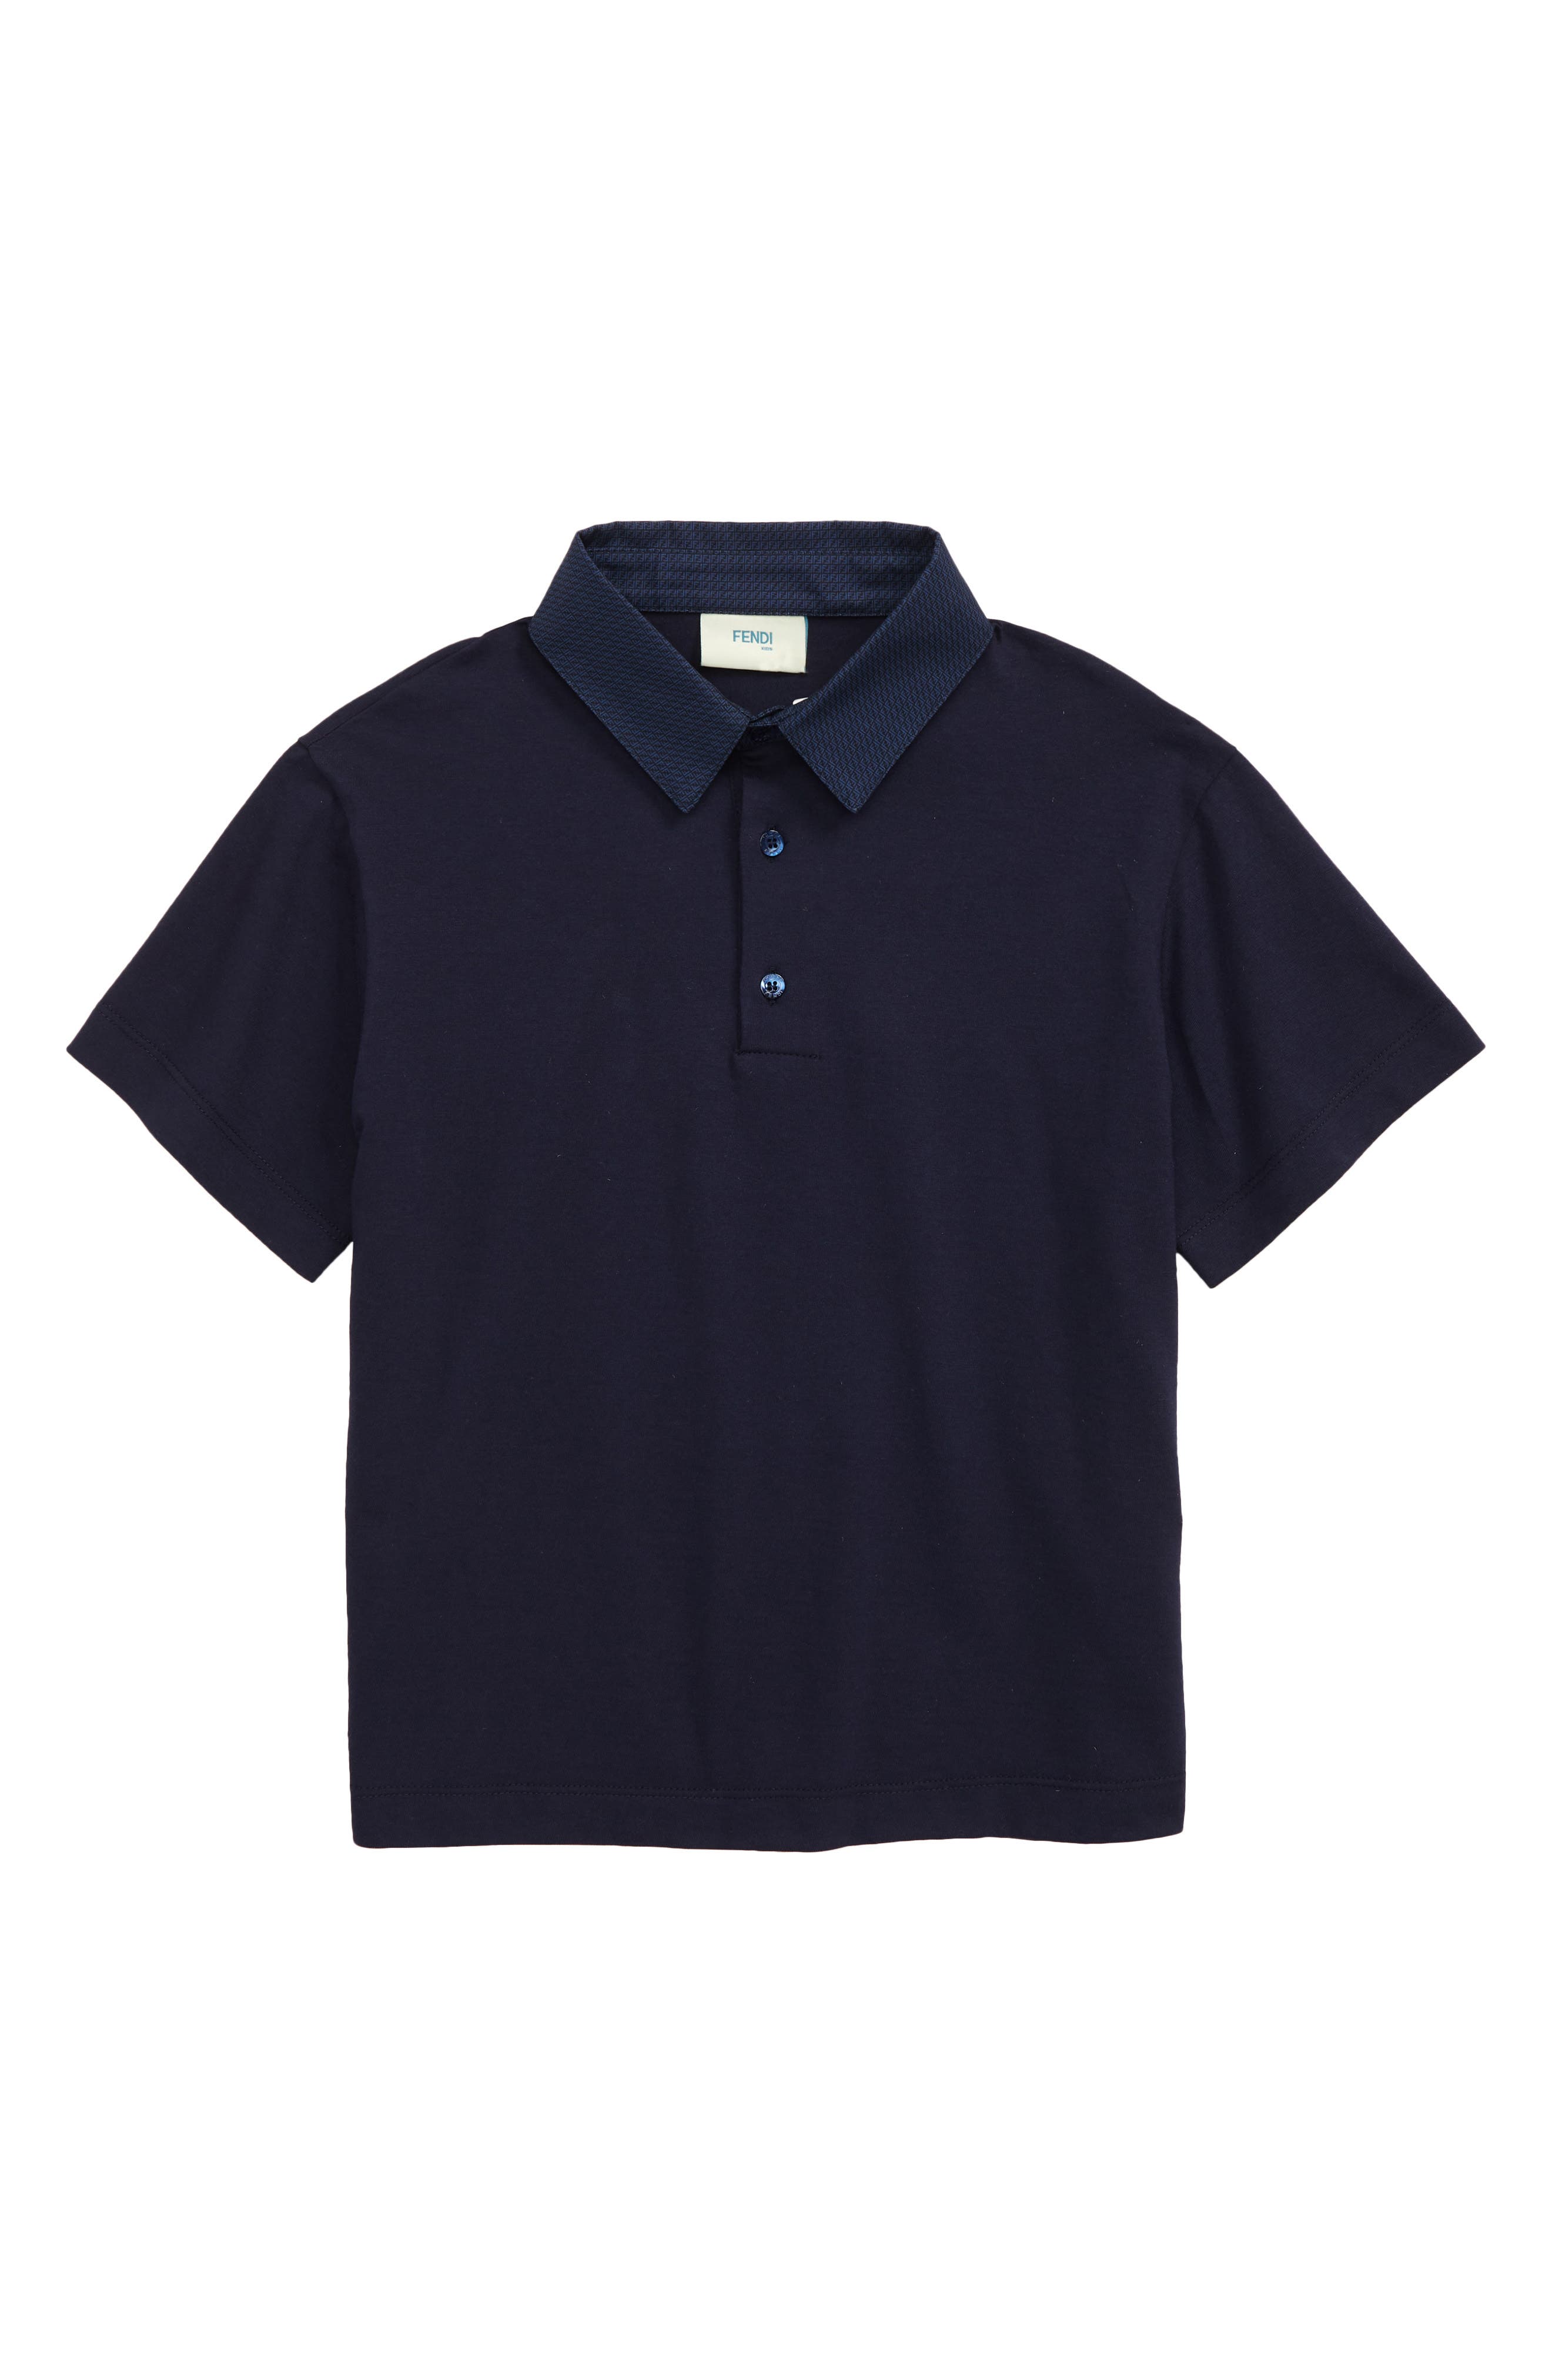 Fendi Kids' FF Logo Coillar Cotton Polo in F0Qb0 Navy at Nordstrom, Size 3Y Us